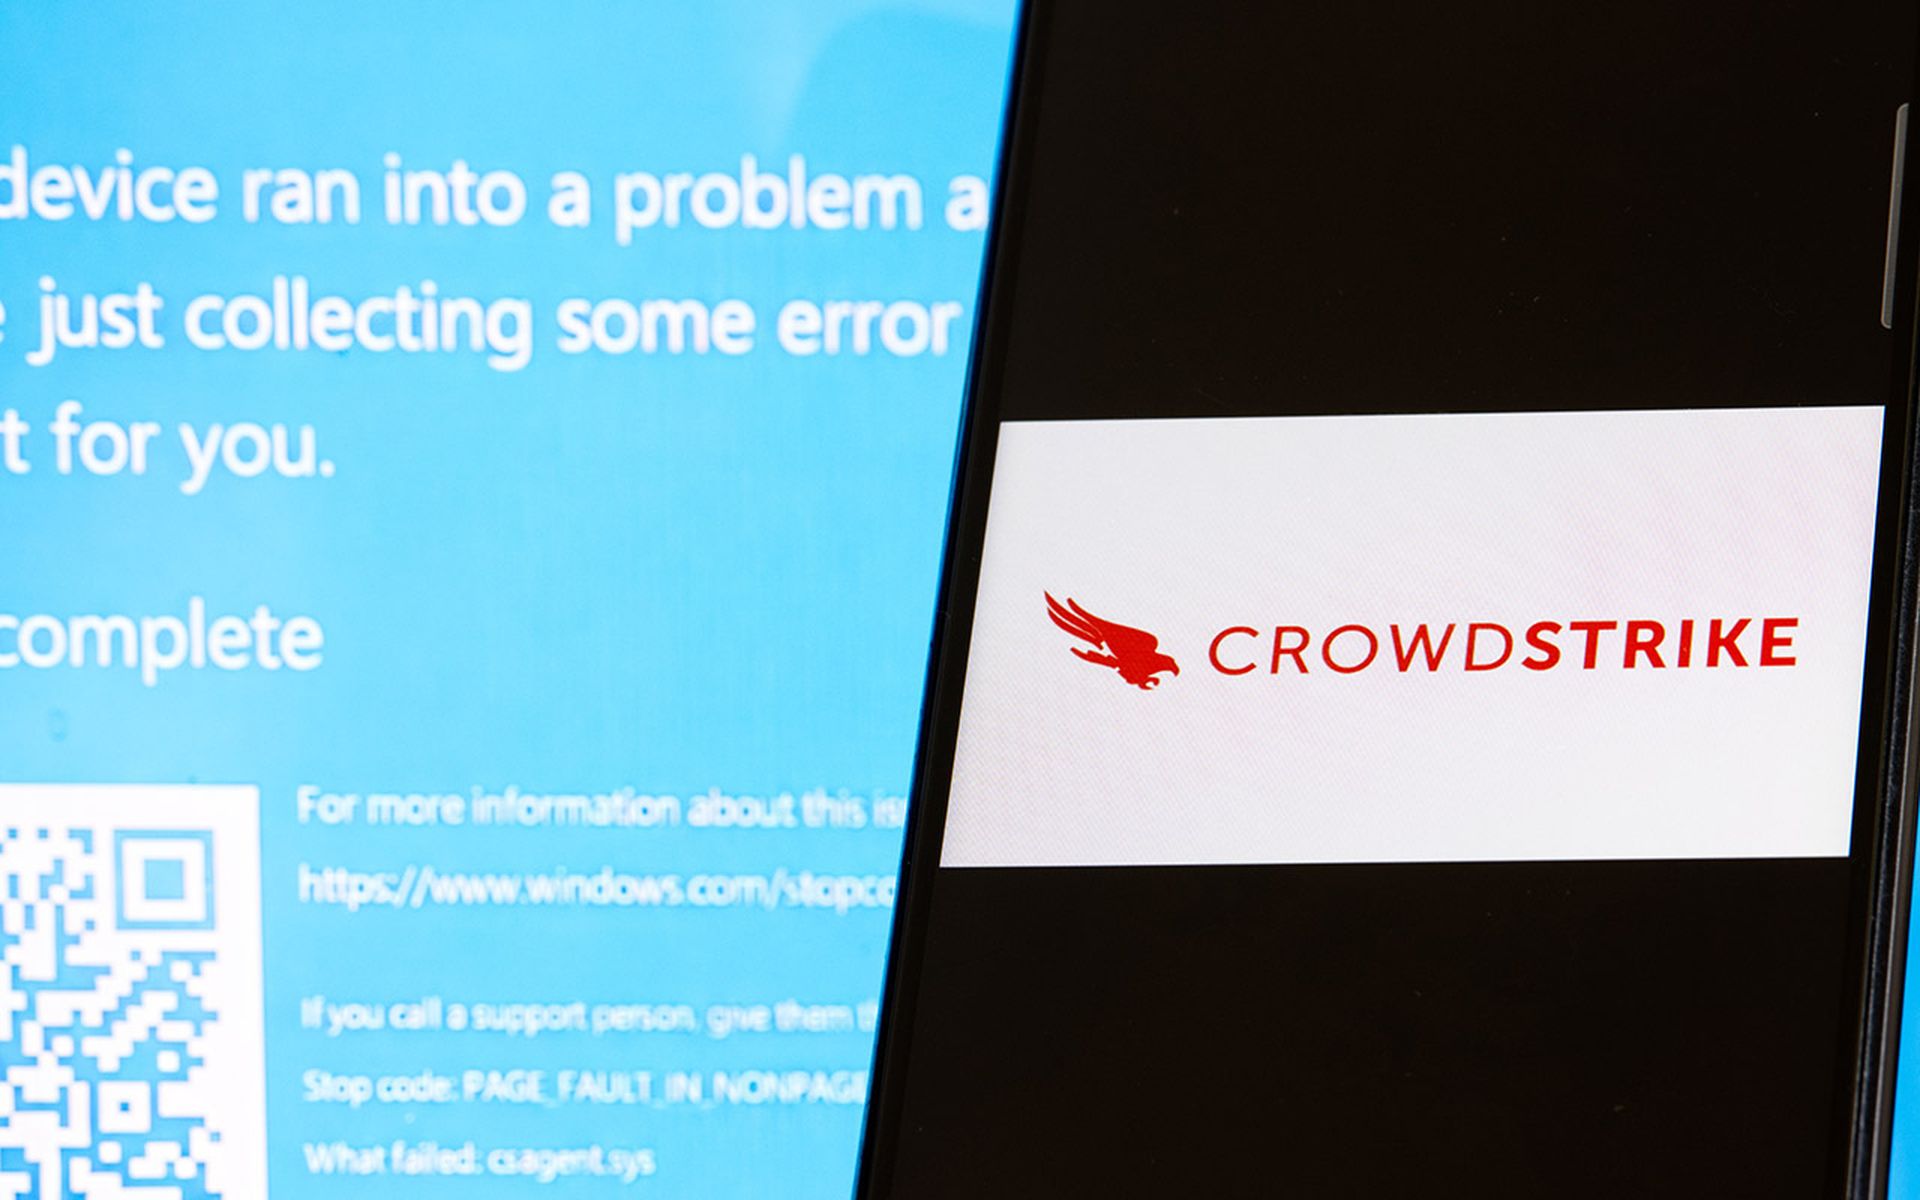 The CrowdStrike logo and a blue computer screen appeared during